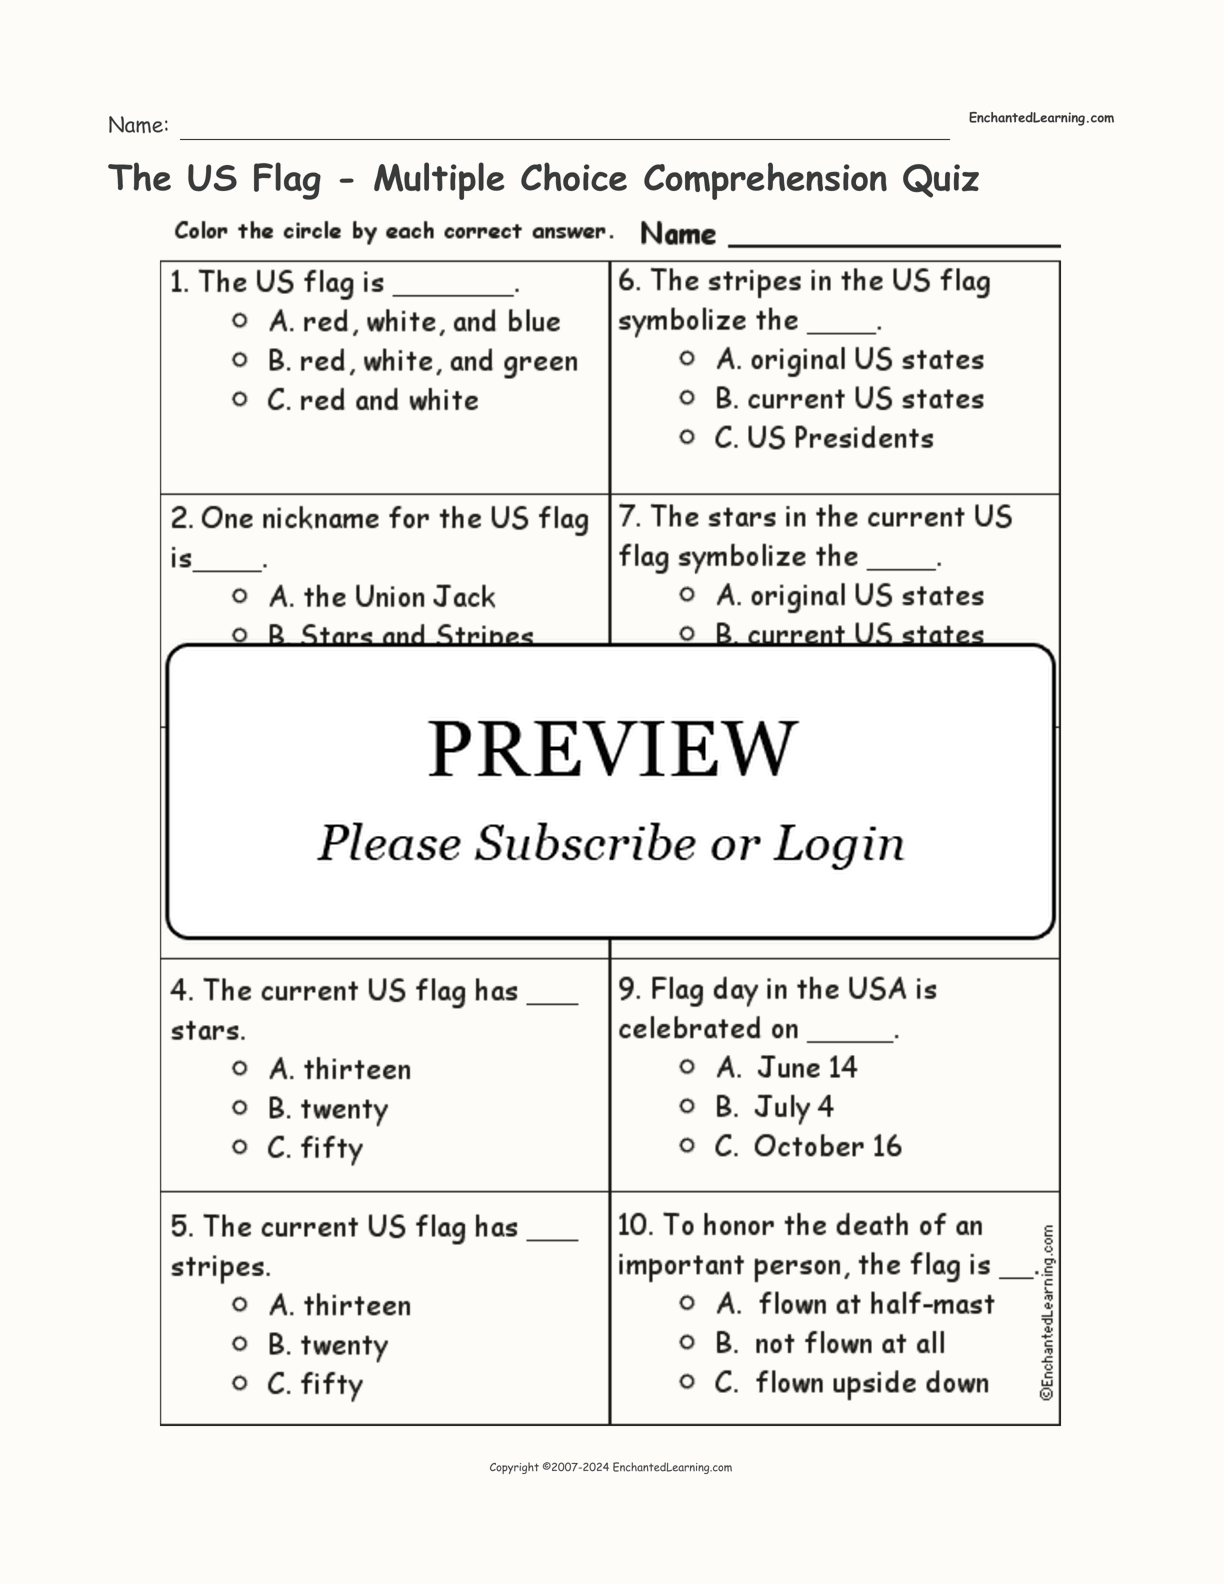 The US Flag - Multiple Choice Comprehension Quiz interactive worksheet page 1